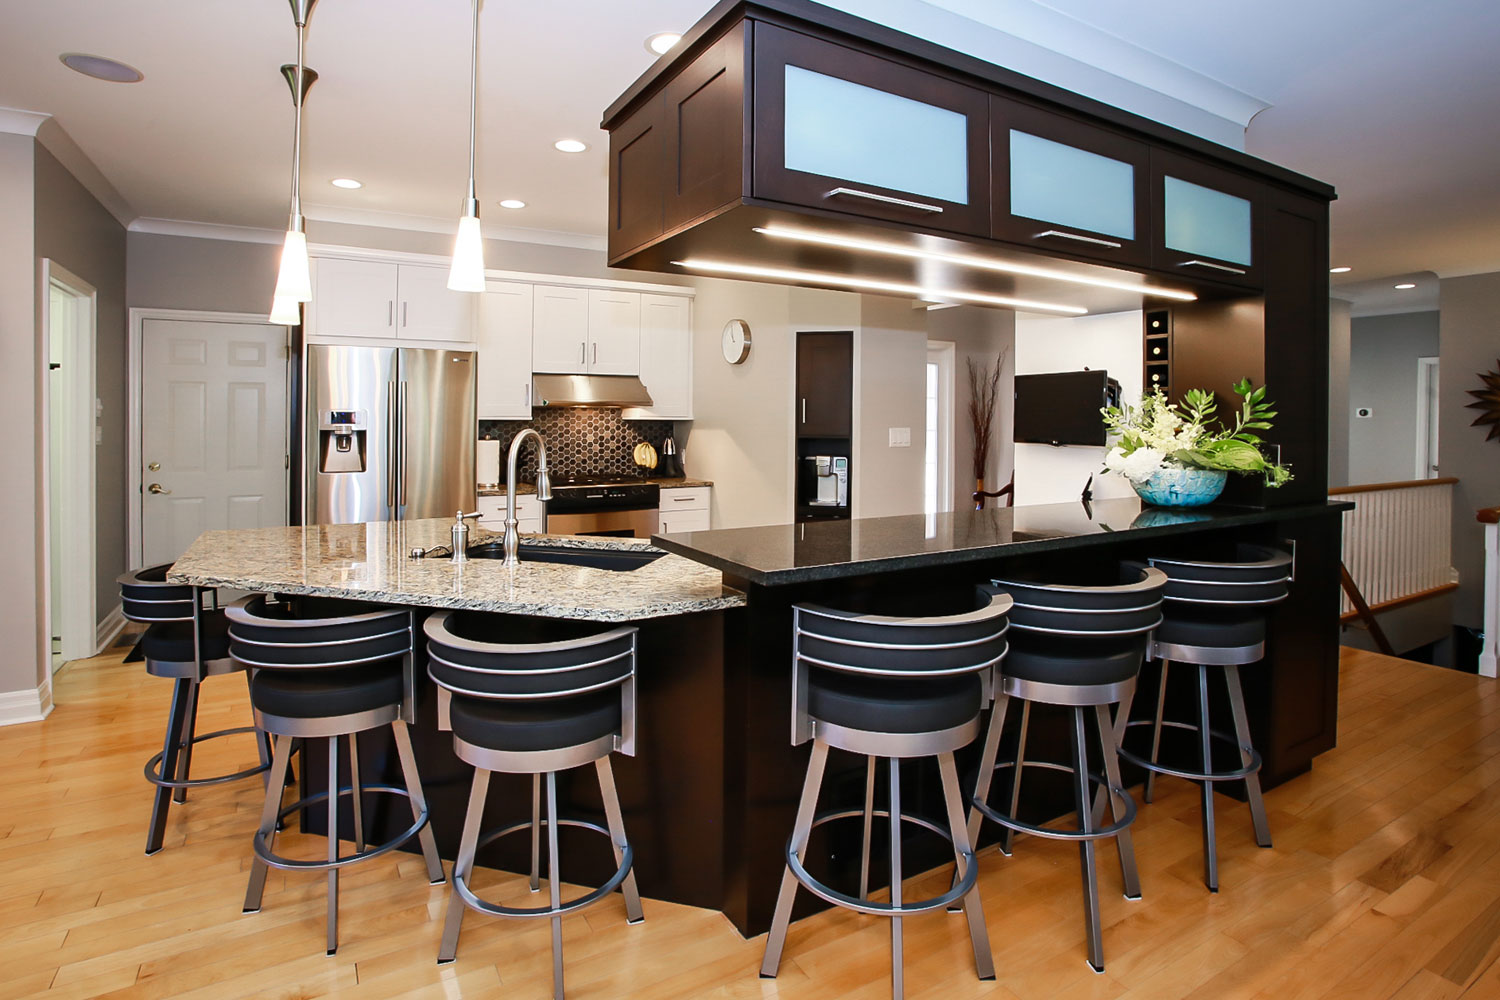 Contemporary kitchen with white and dark wood cabinets featuring a dual height island, stainless steel appliances, built-in cappucino machine and wine shelf - Total Living Concepts